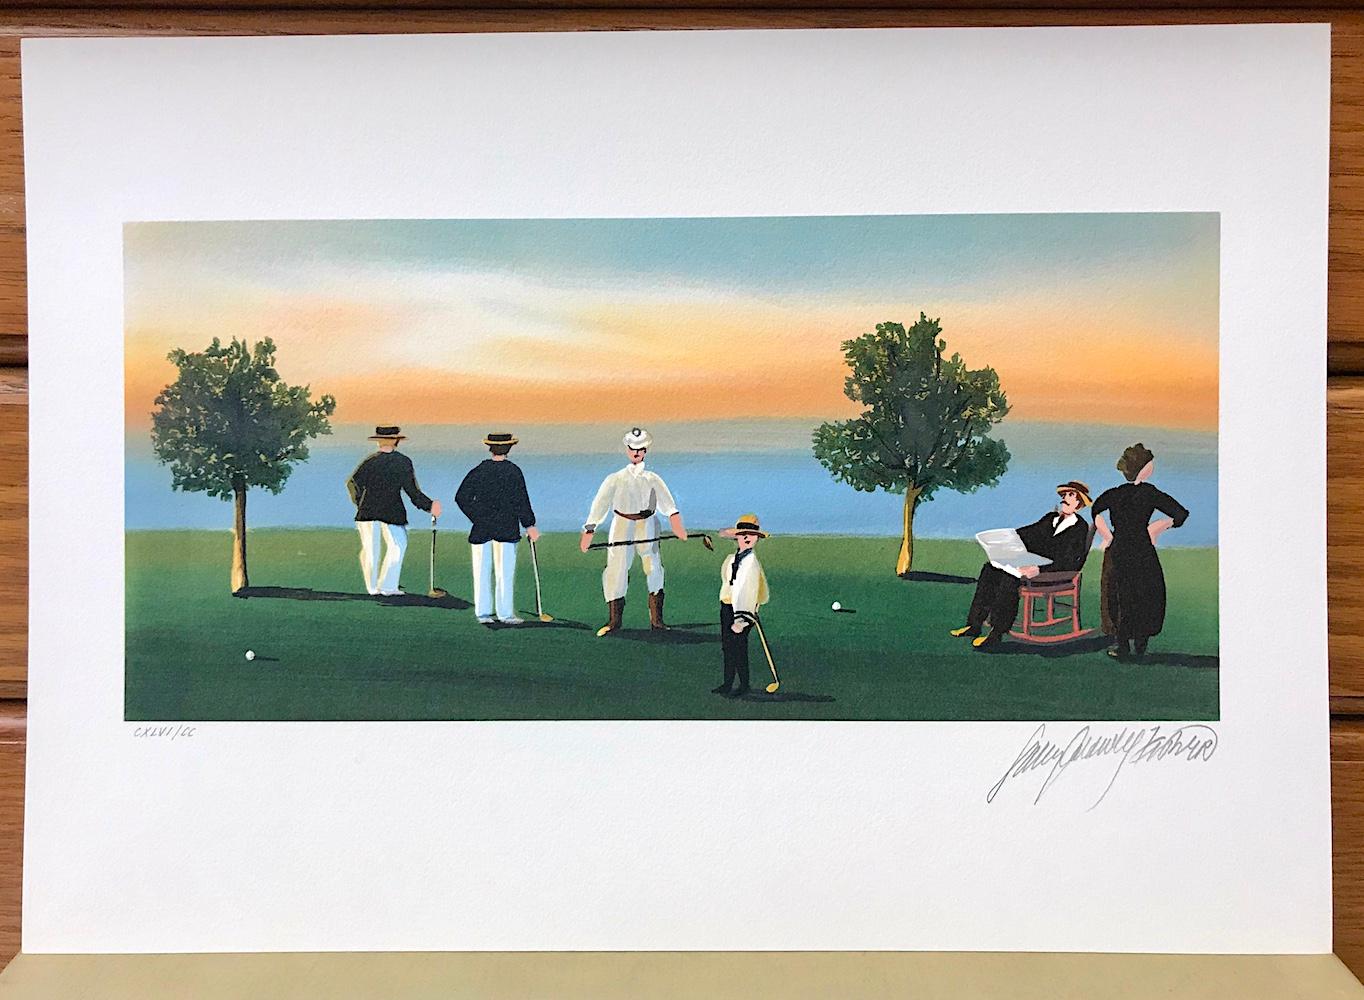 RUSTICATORS AT THE CLOSE OF DAY Signed Lithograph, New England Golfers, Sunset - Contemporary Print by Sally Caldwell-Fisher